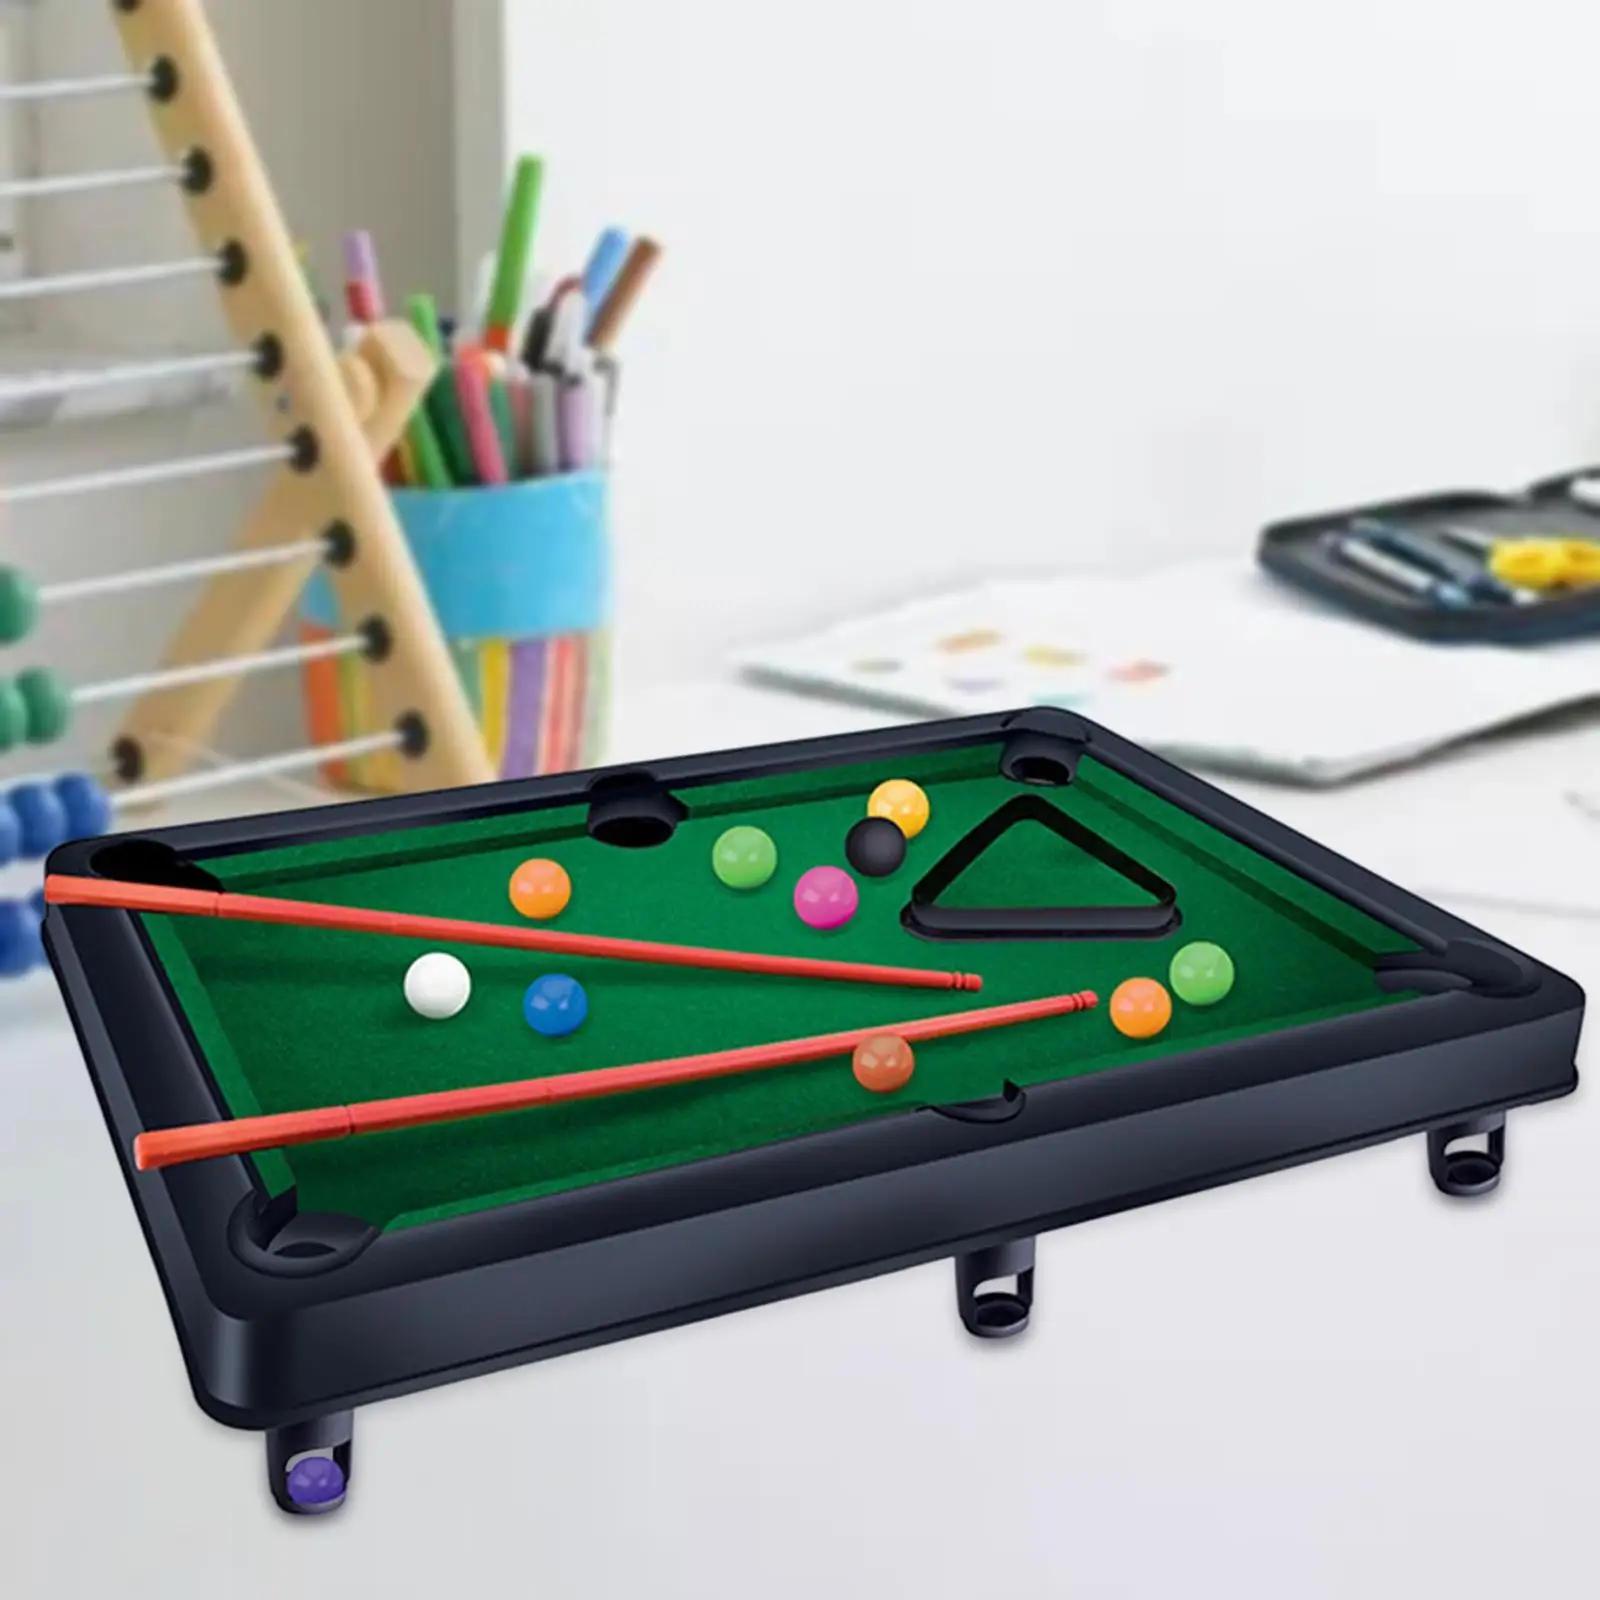 Mini Tabletop Pool Set Billiards Game Tabletop Pool Table Game Set with Game Balls for Desk Living Room Playroom Party Office